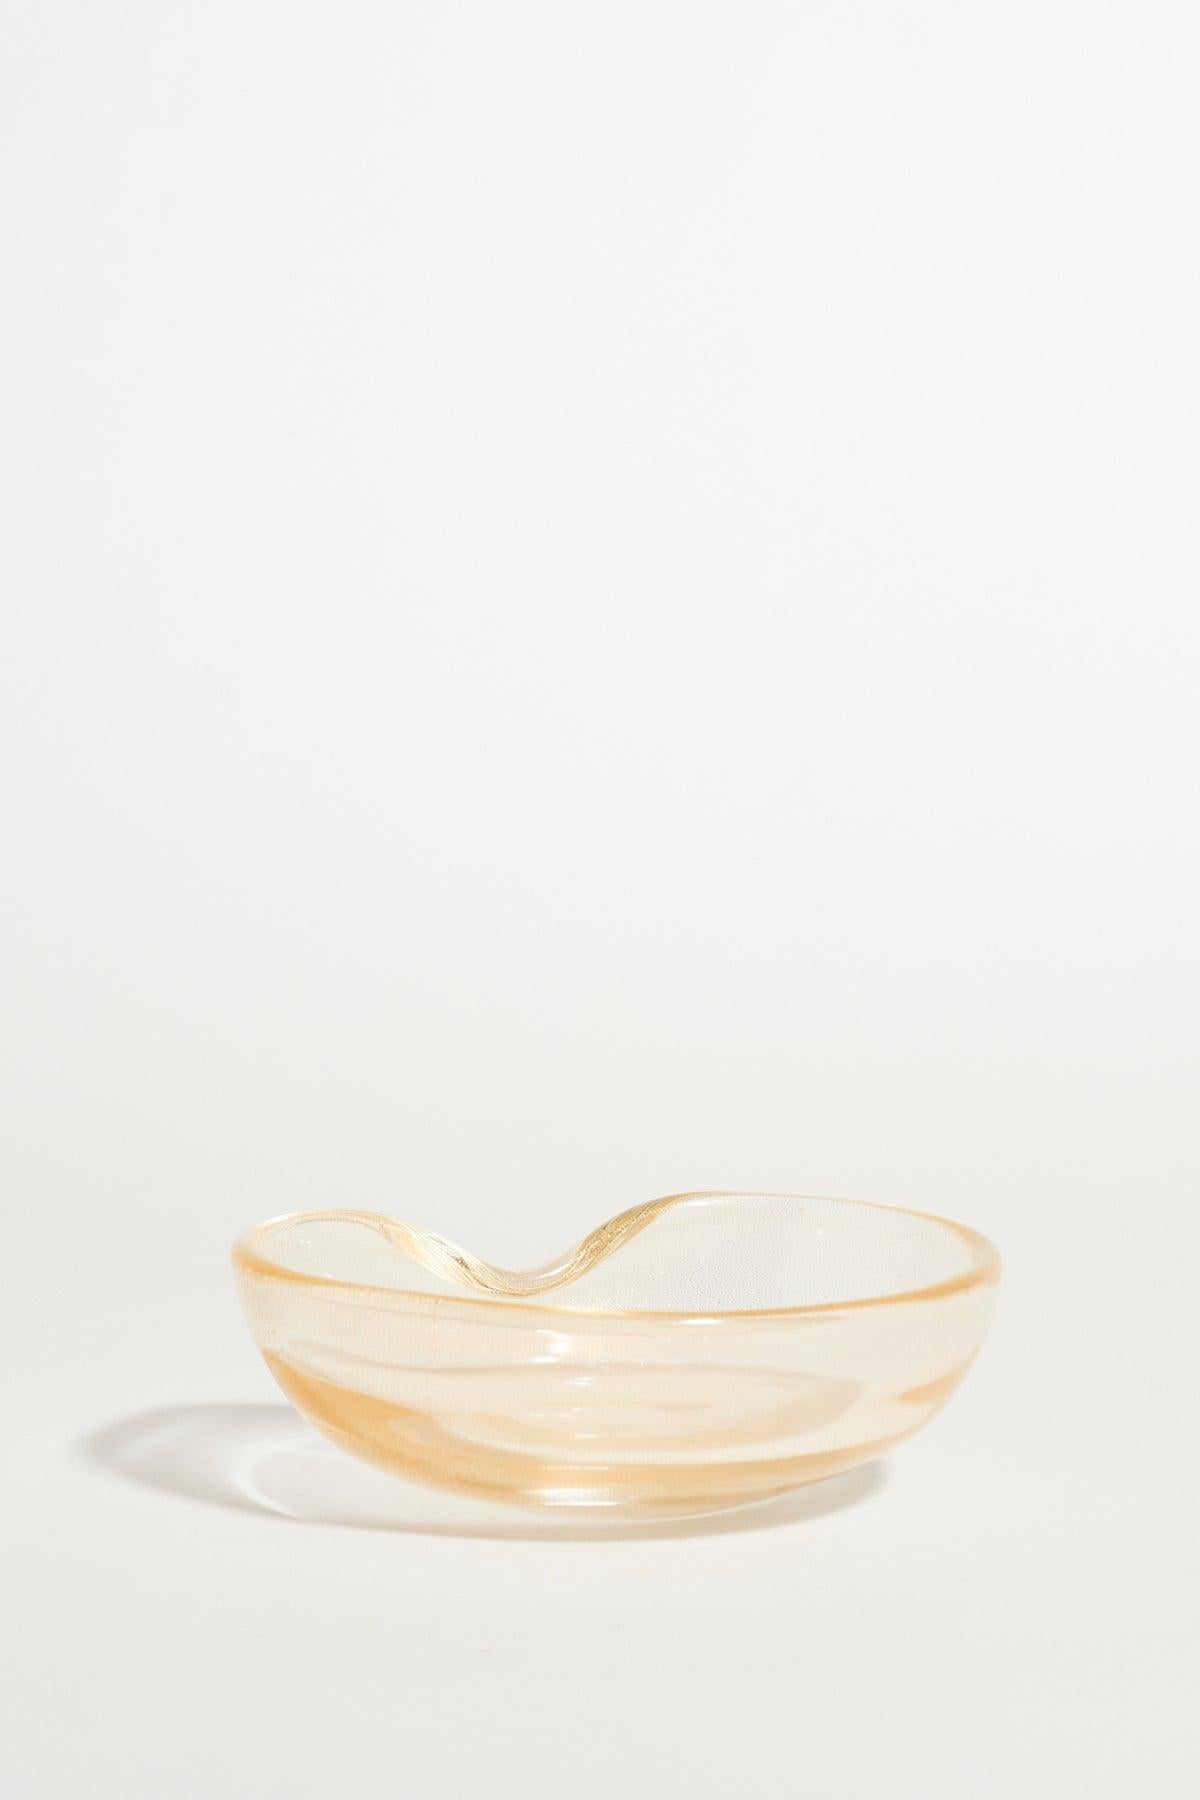 Simple gold flecked glass catchall with indented rim by renowned Italian designer Elsa Peretti for Tiffany and Co.